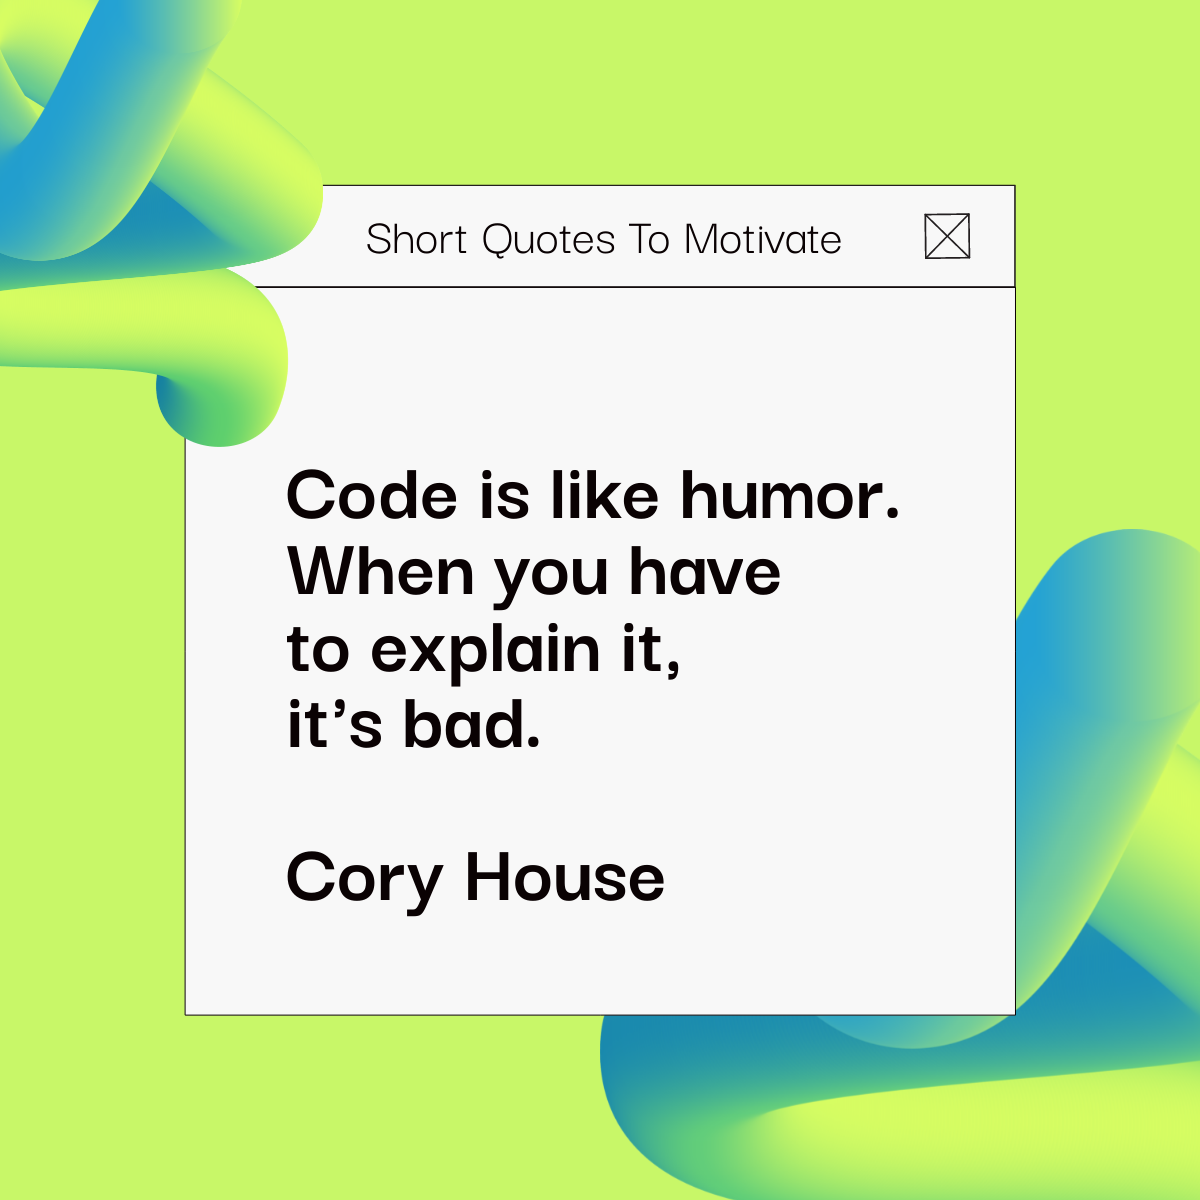 quote by Cory House